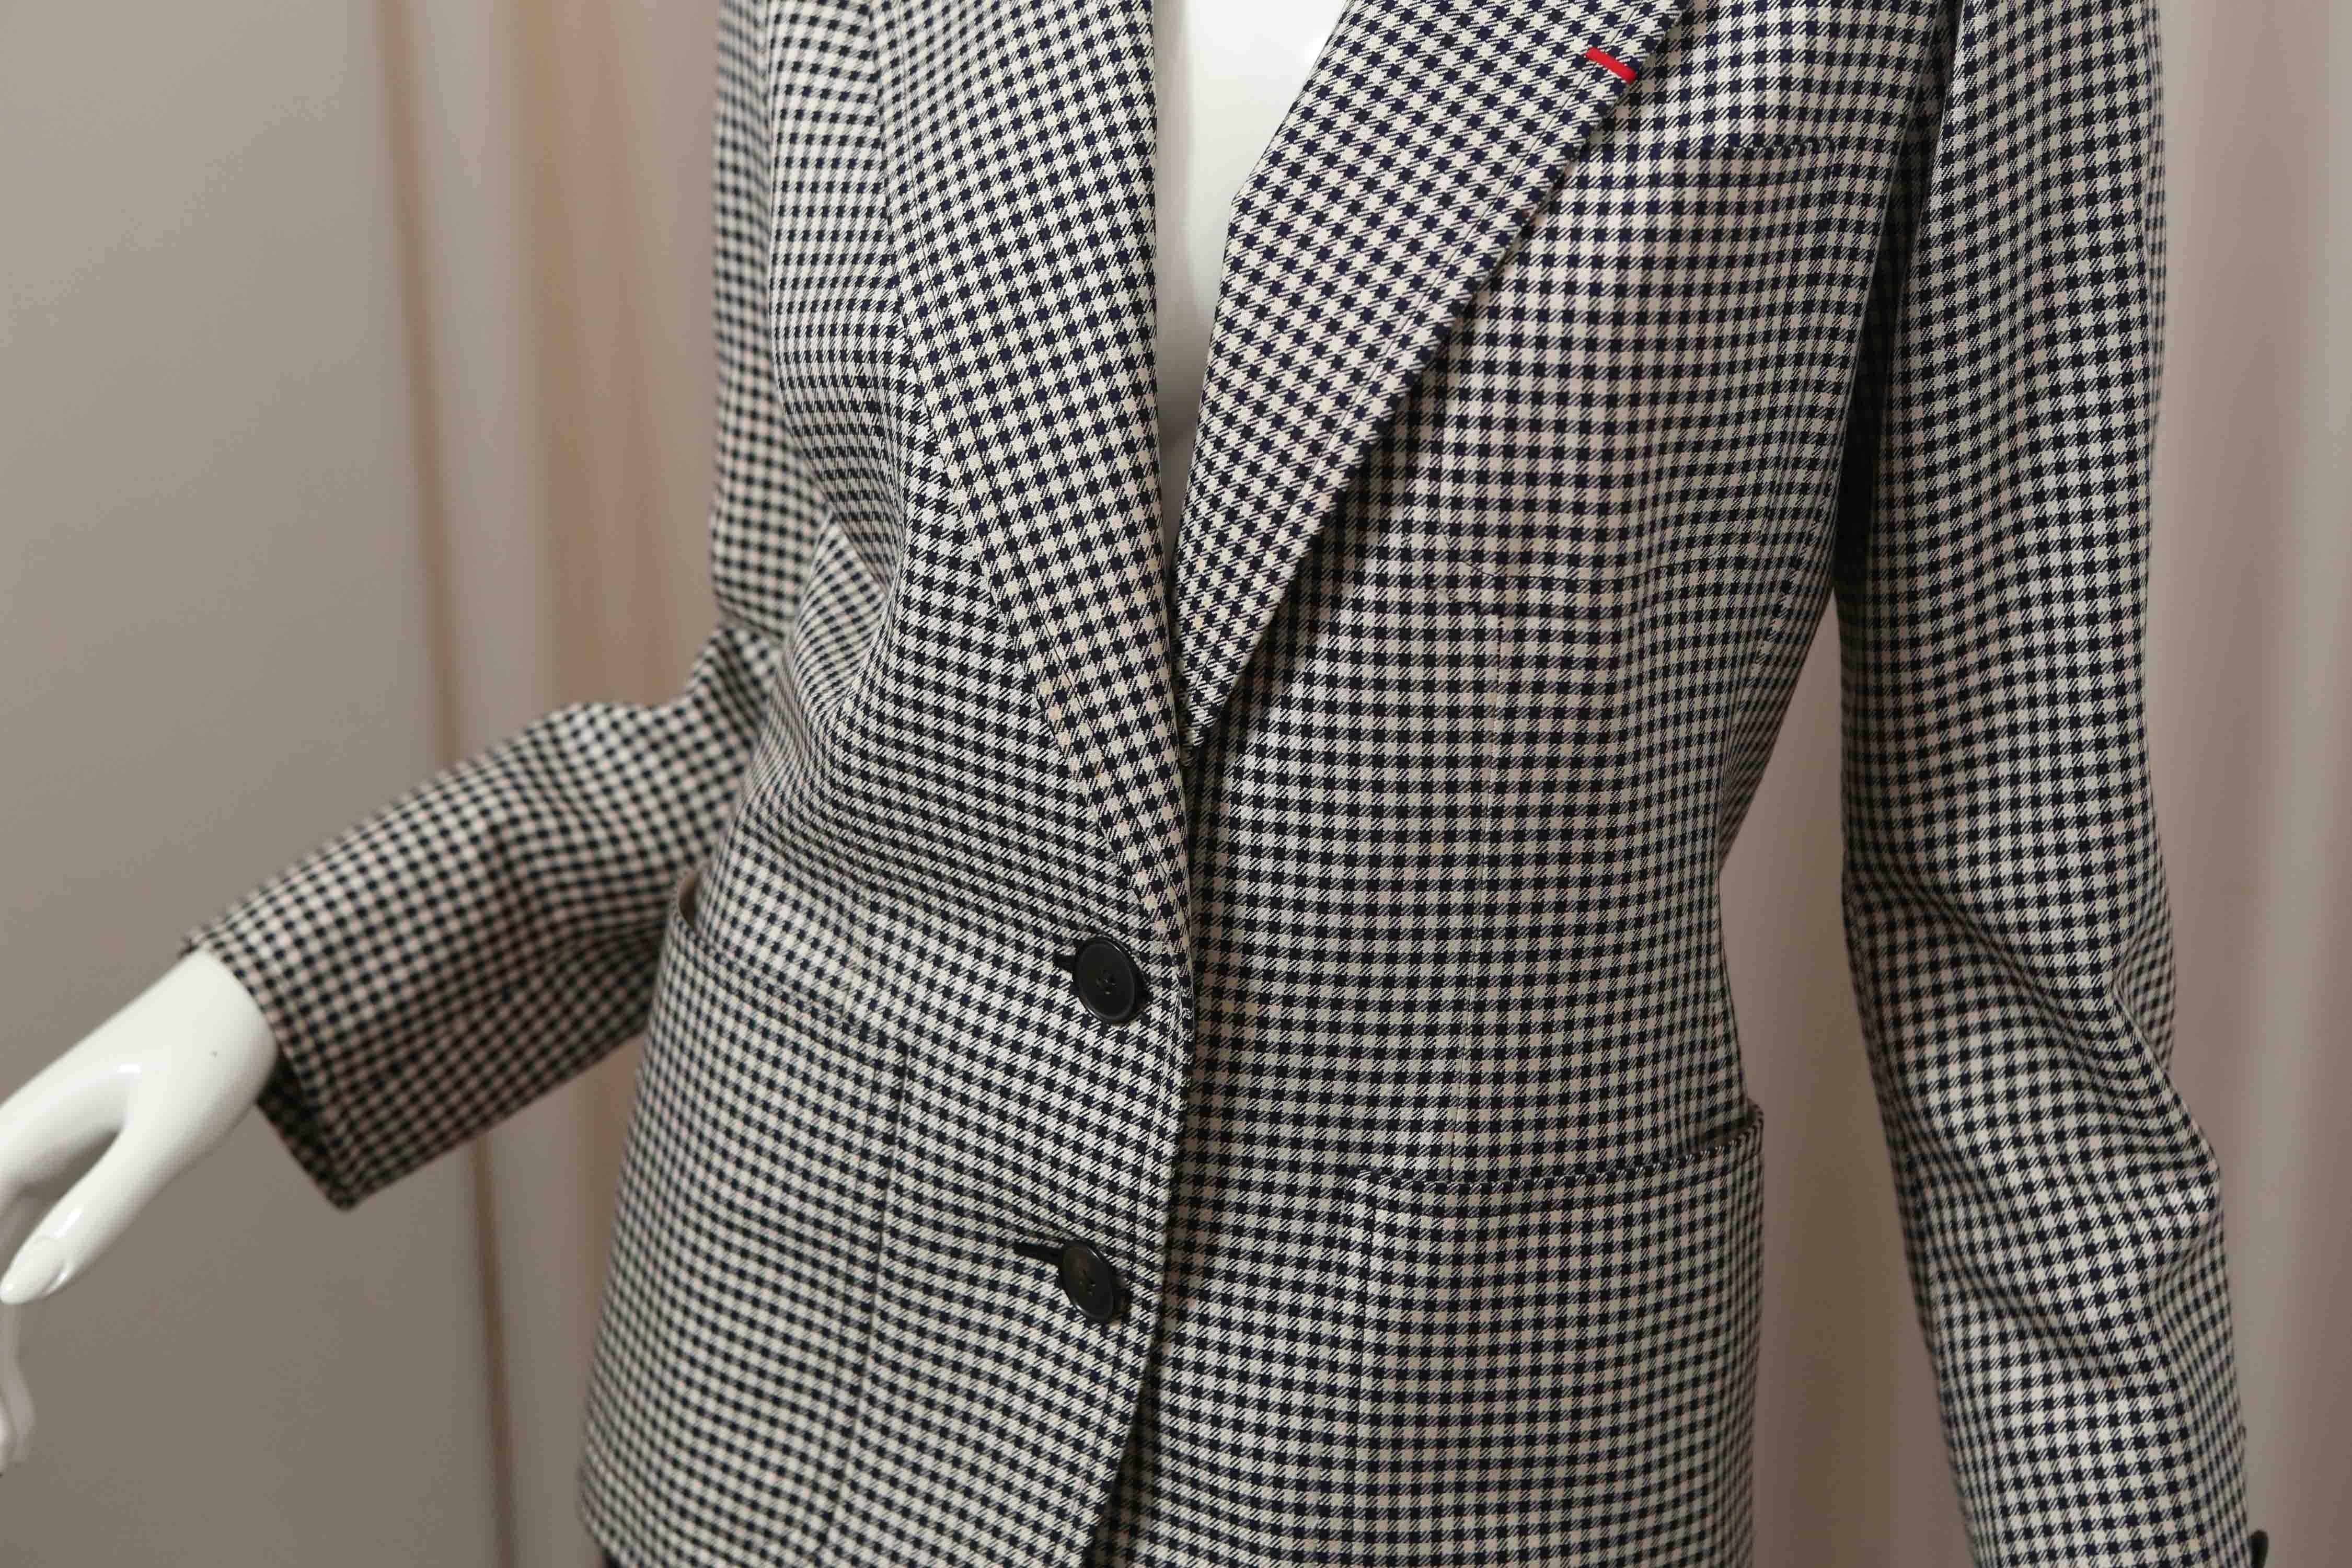 Black and white houndstooth blazer with front pockets, cotton/wool blend.